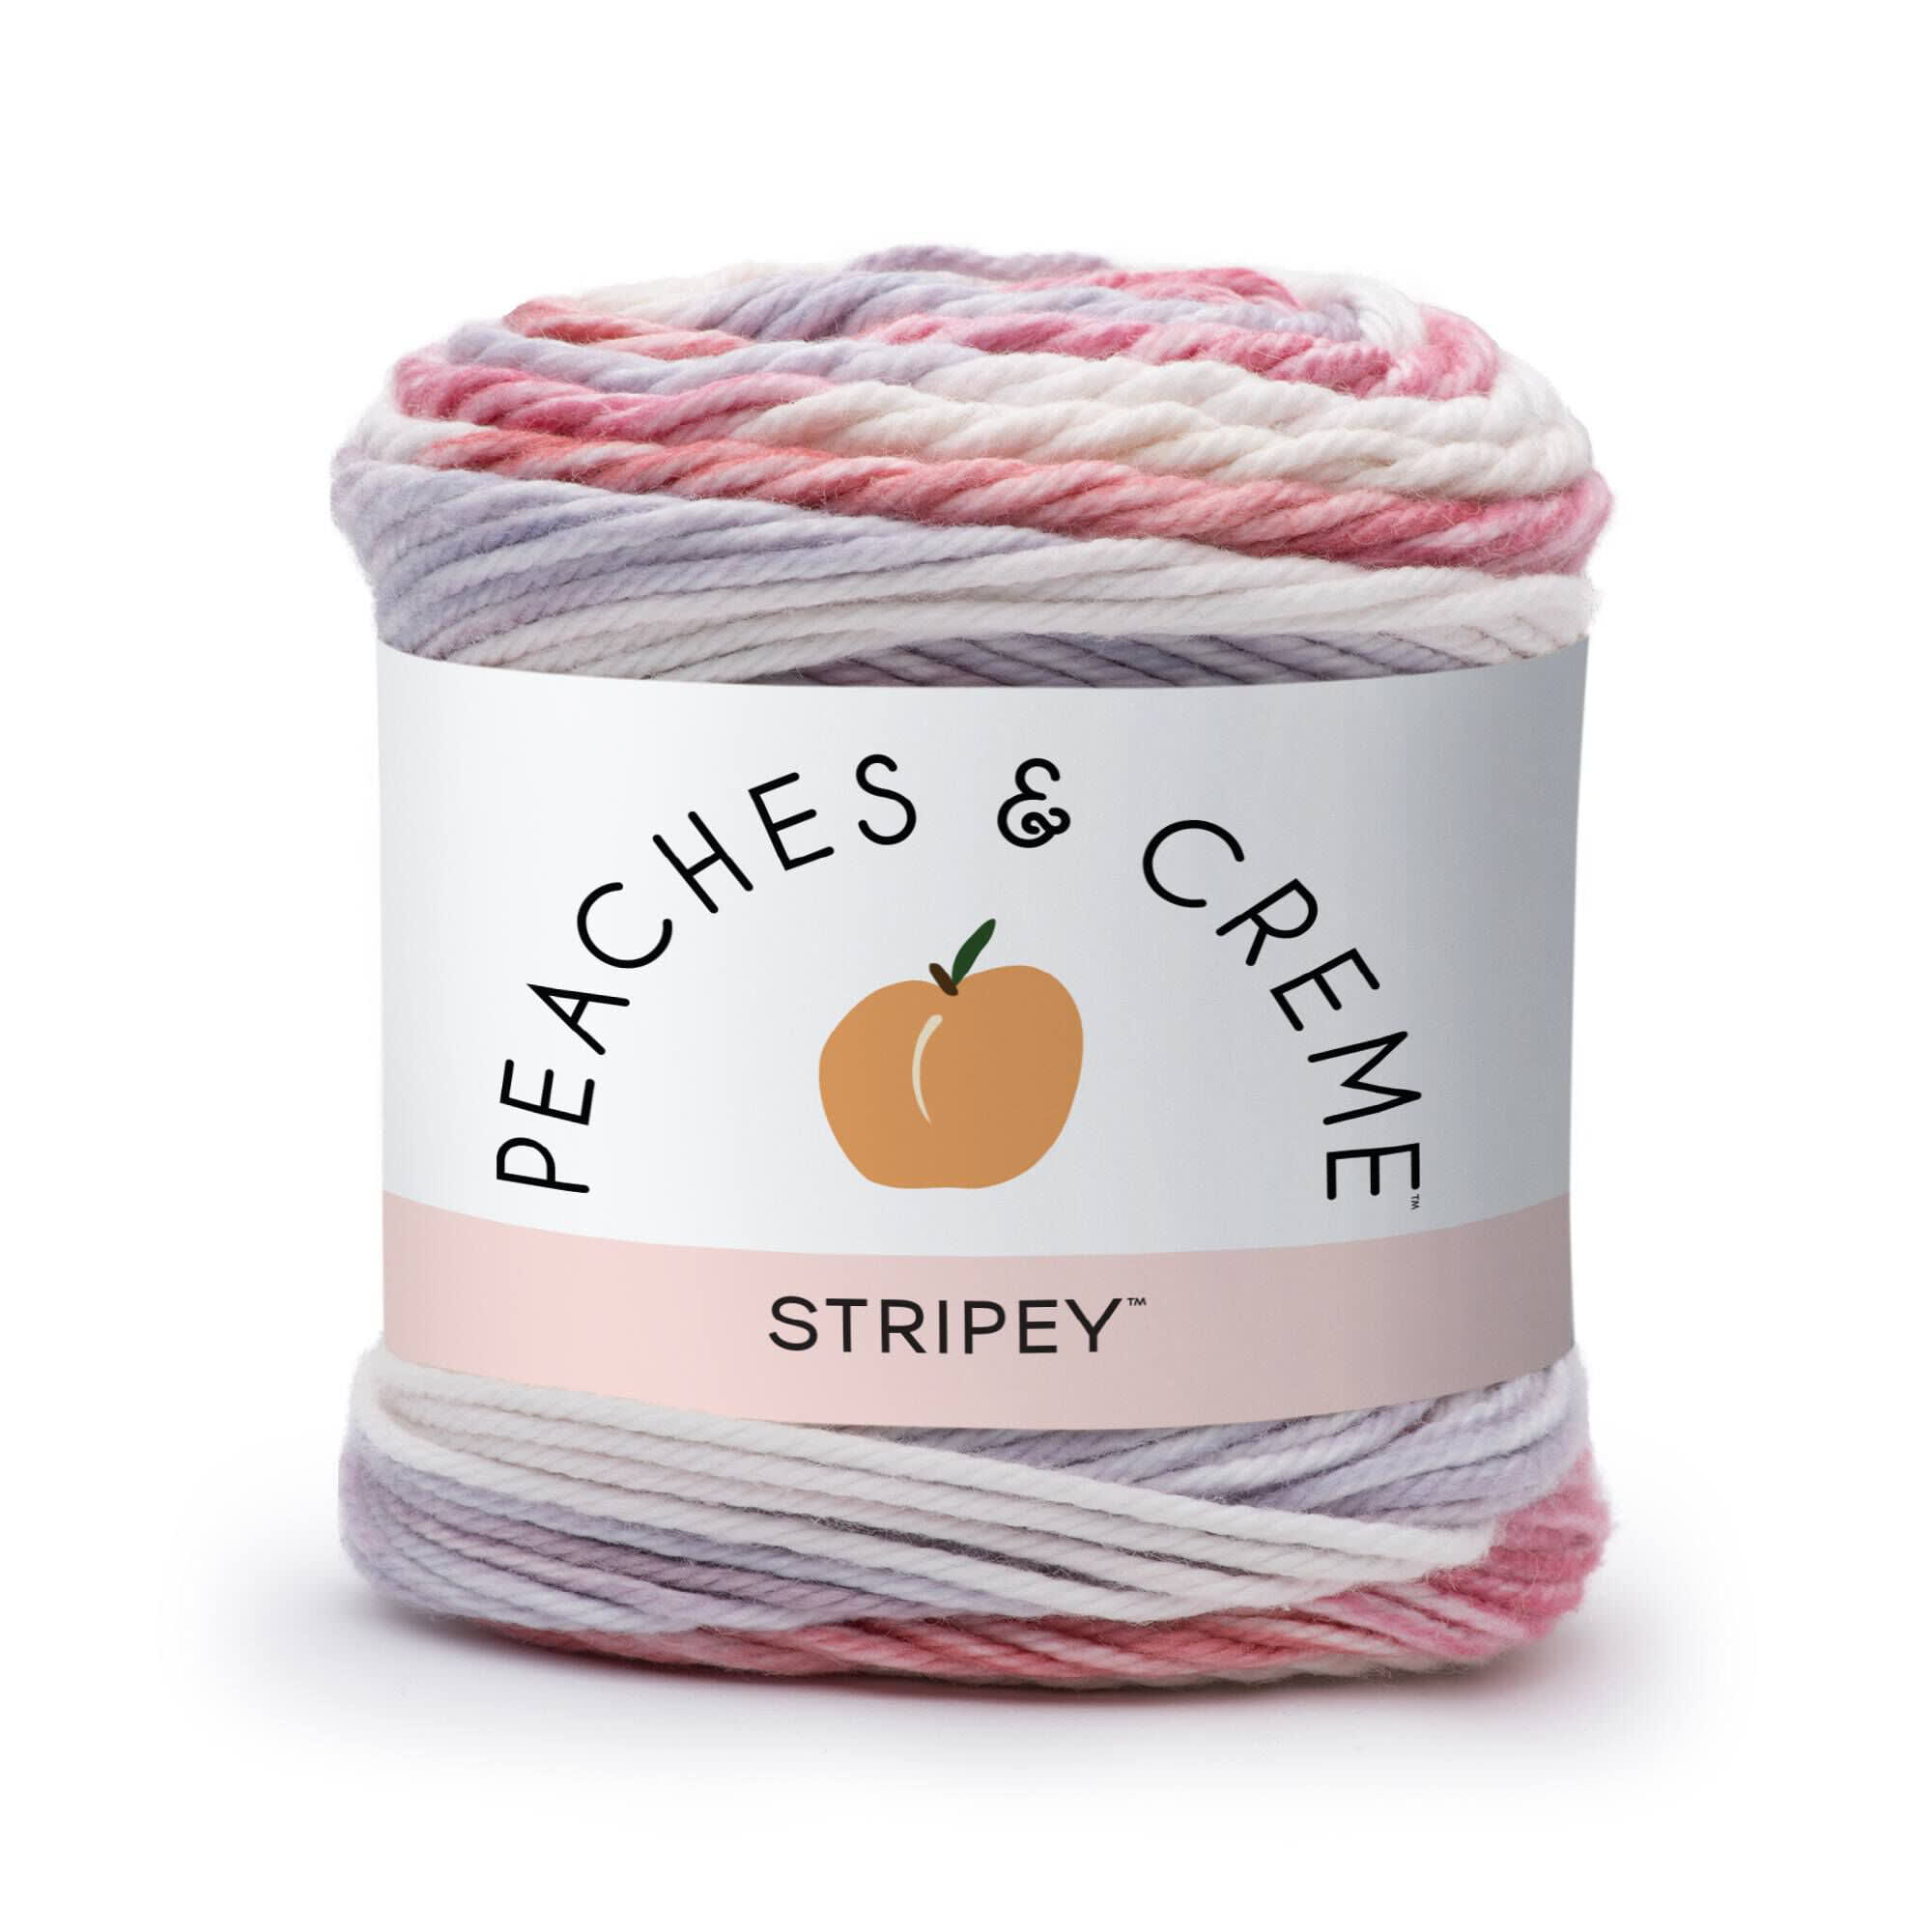 Peaches & Creme Solid 4 Medium Cotton Yarn, Forest Green 2.5oz/70.9g, 120  Yards - DroneUp Delivery